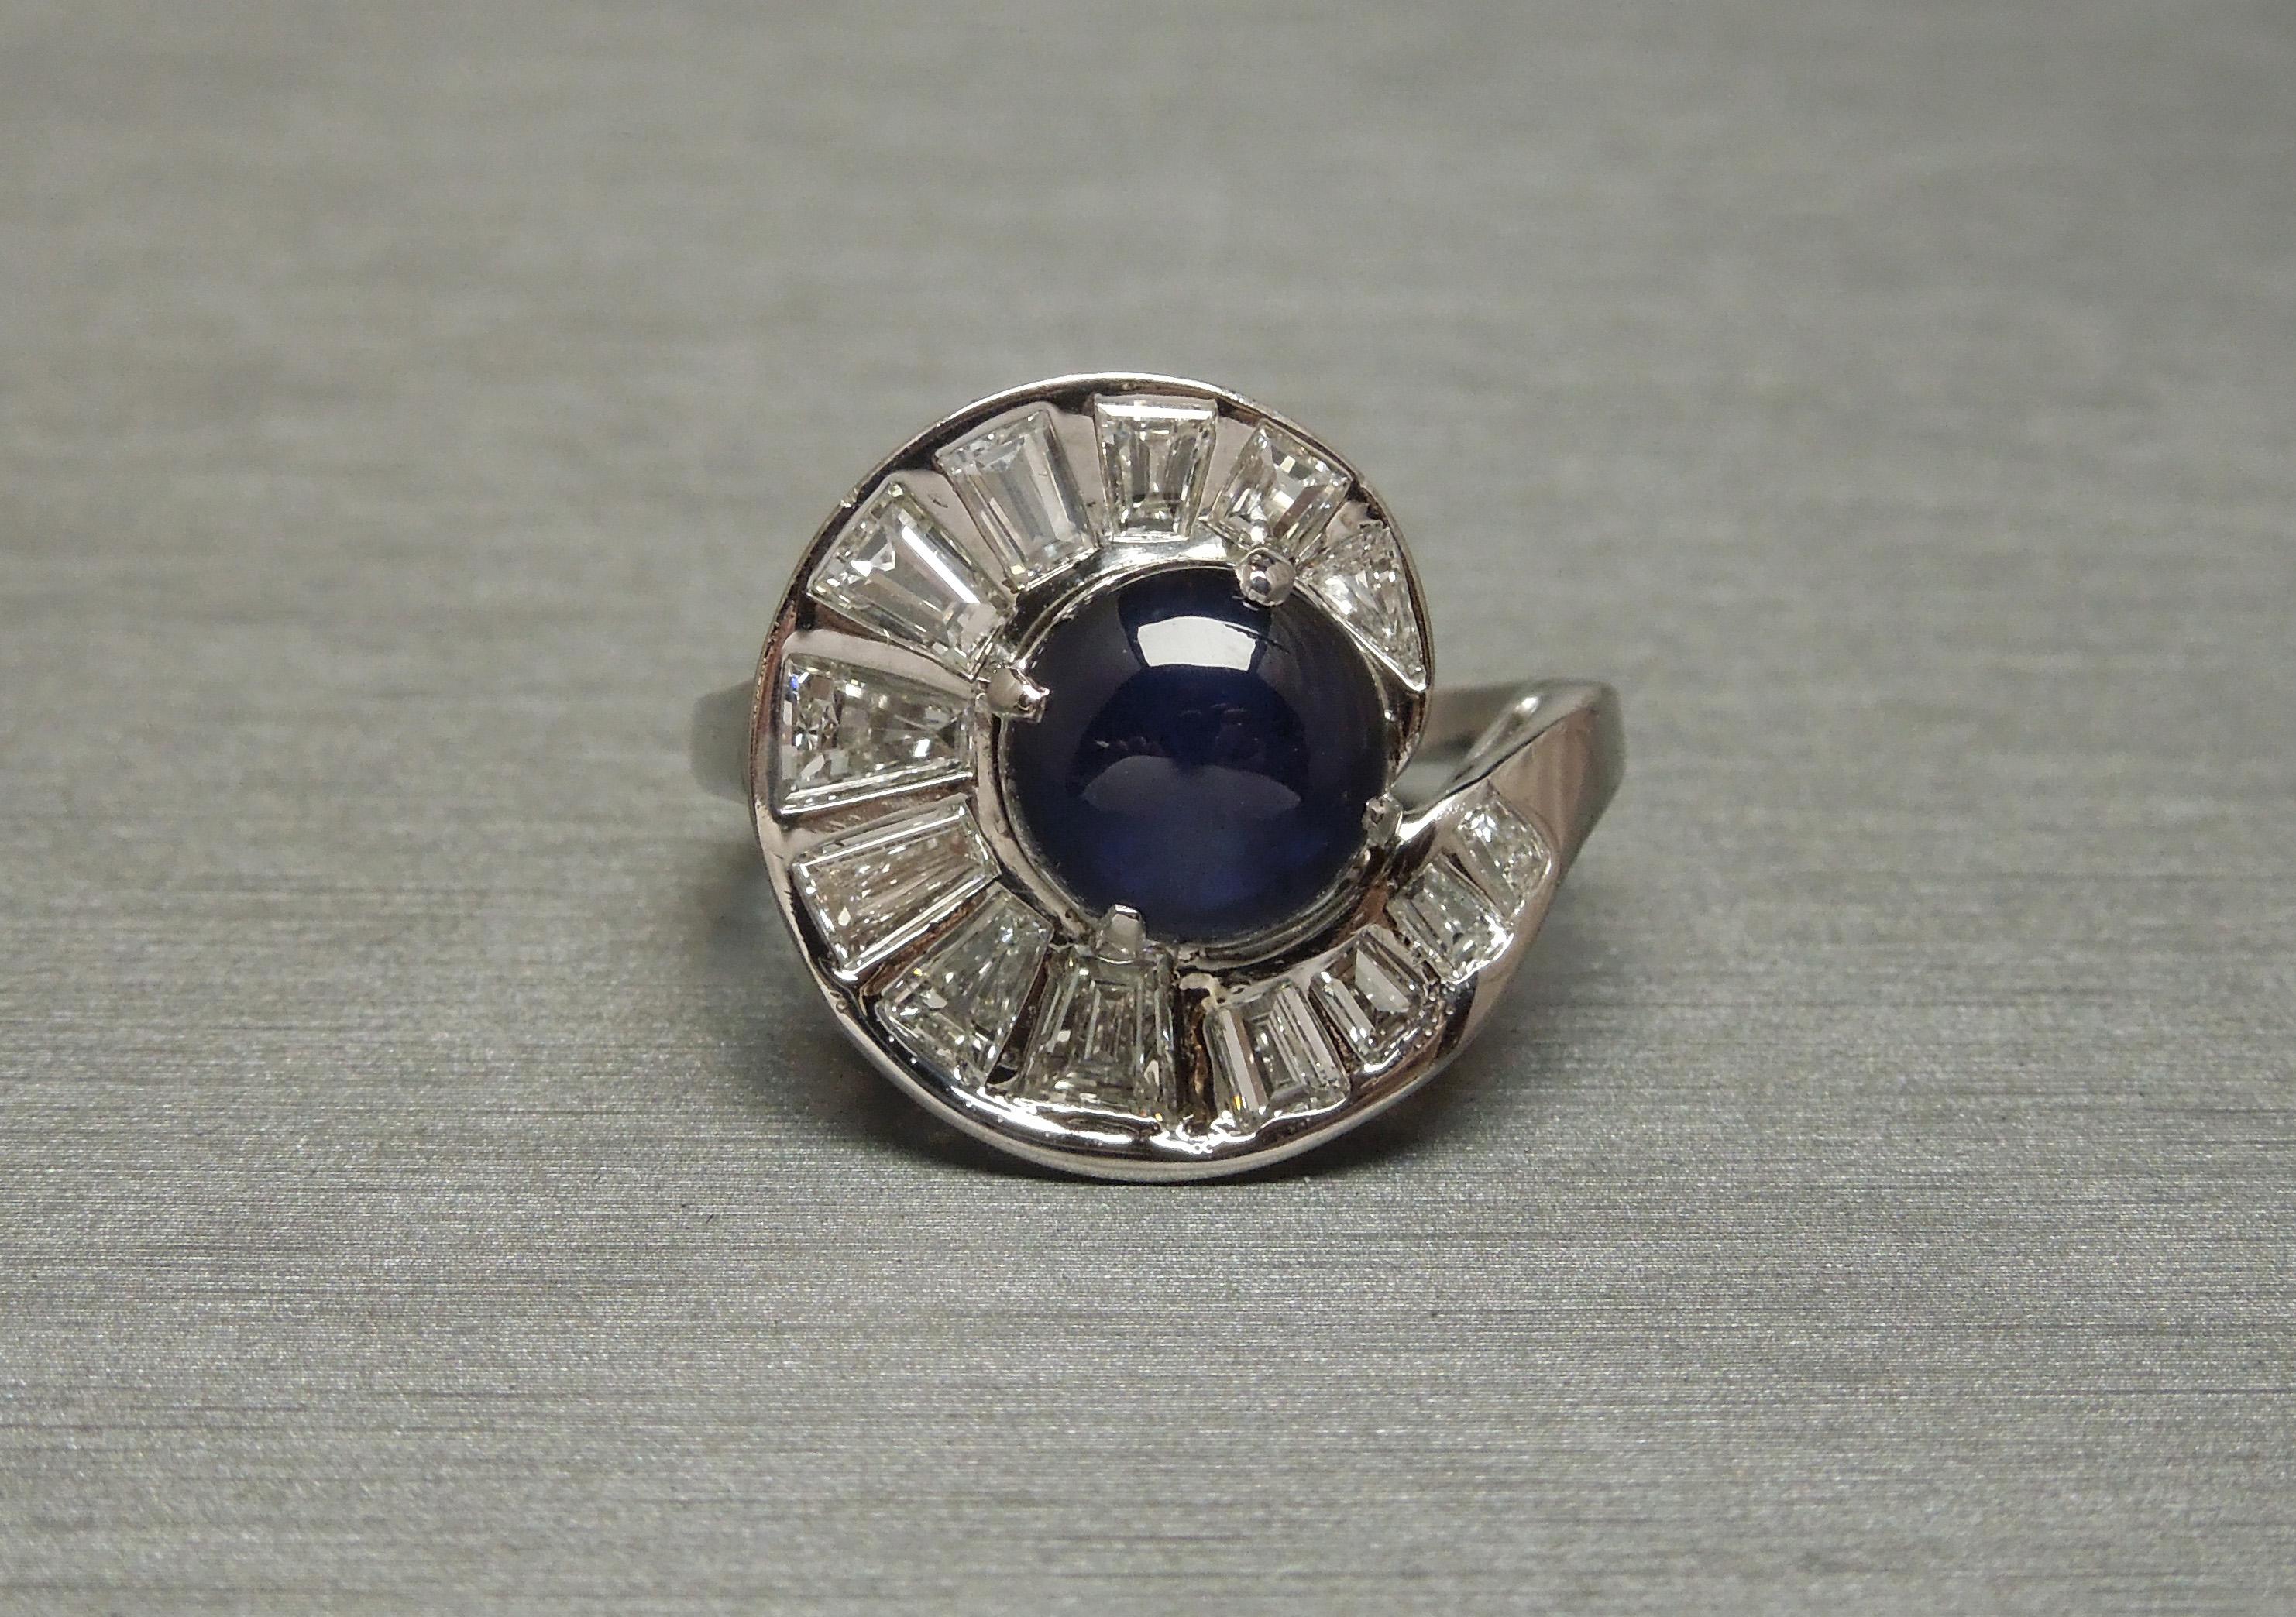 Cabochon Midcentury 2.57 Carat Sapphire Piano Key Cocktail Ring For Sale